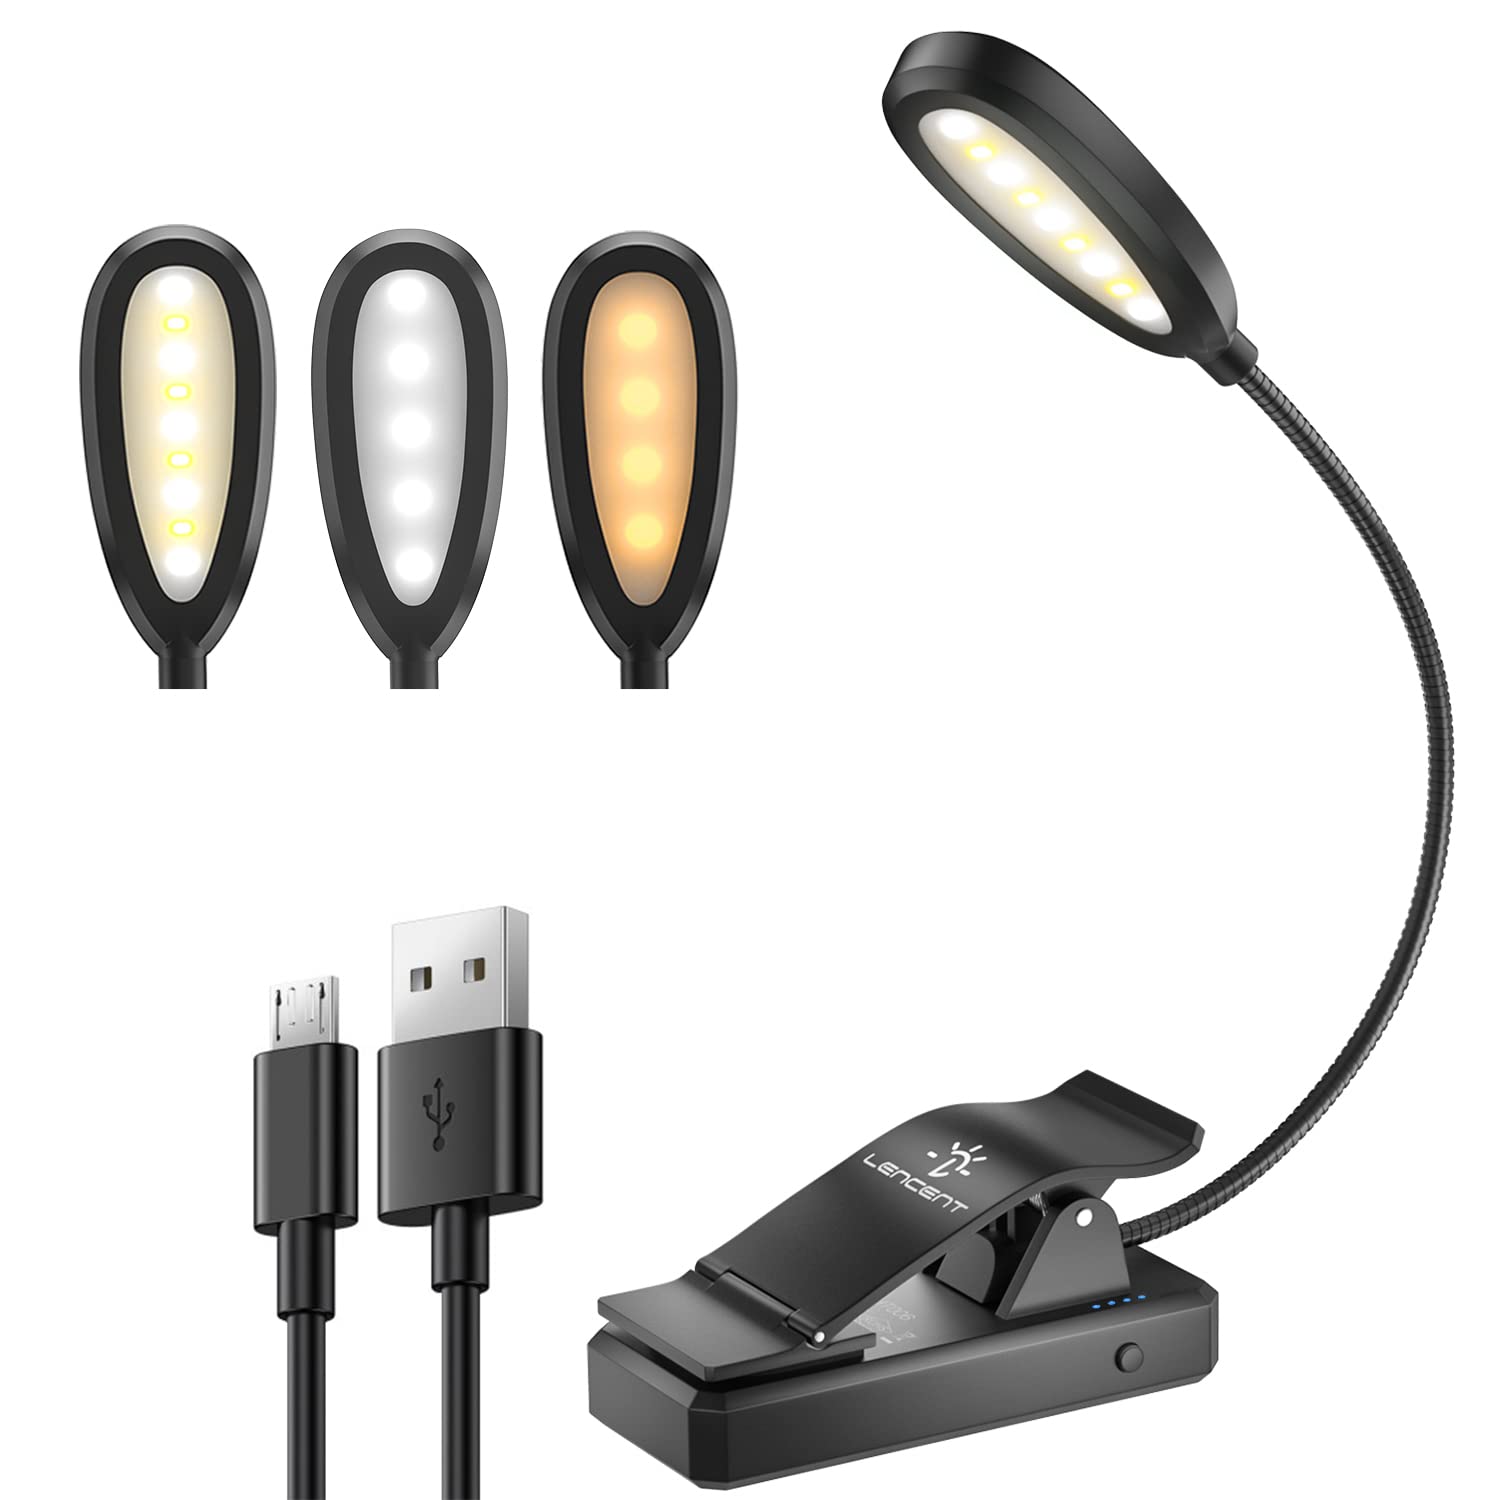 LENCENT 9 LED Book Light, 3 Colors and 9 Brightness Modes (Warm & White LEDs) USB Rechargeable Clip Reading Light for Kids, Clip on Lamp Built in Battery for Book, Travel, etc [USB Cable Incl]